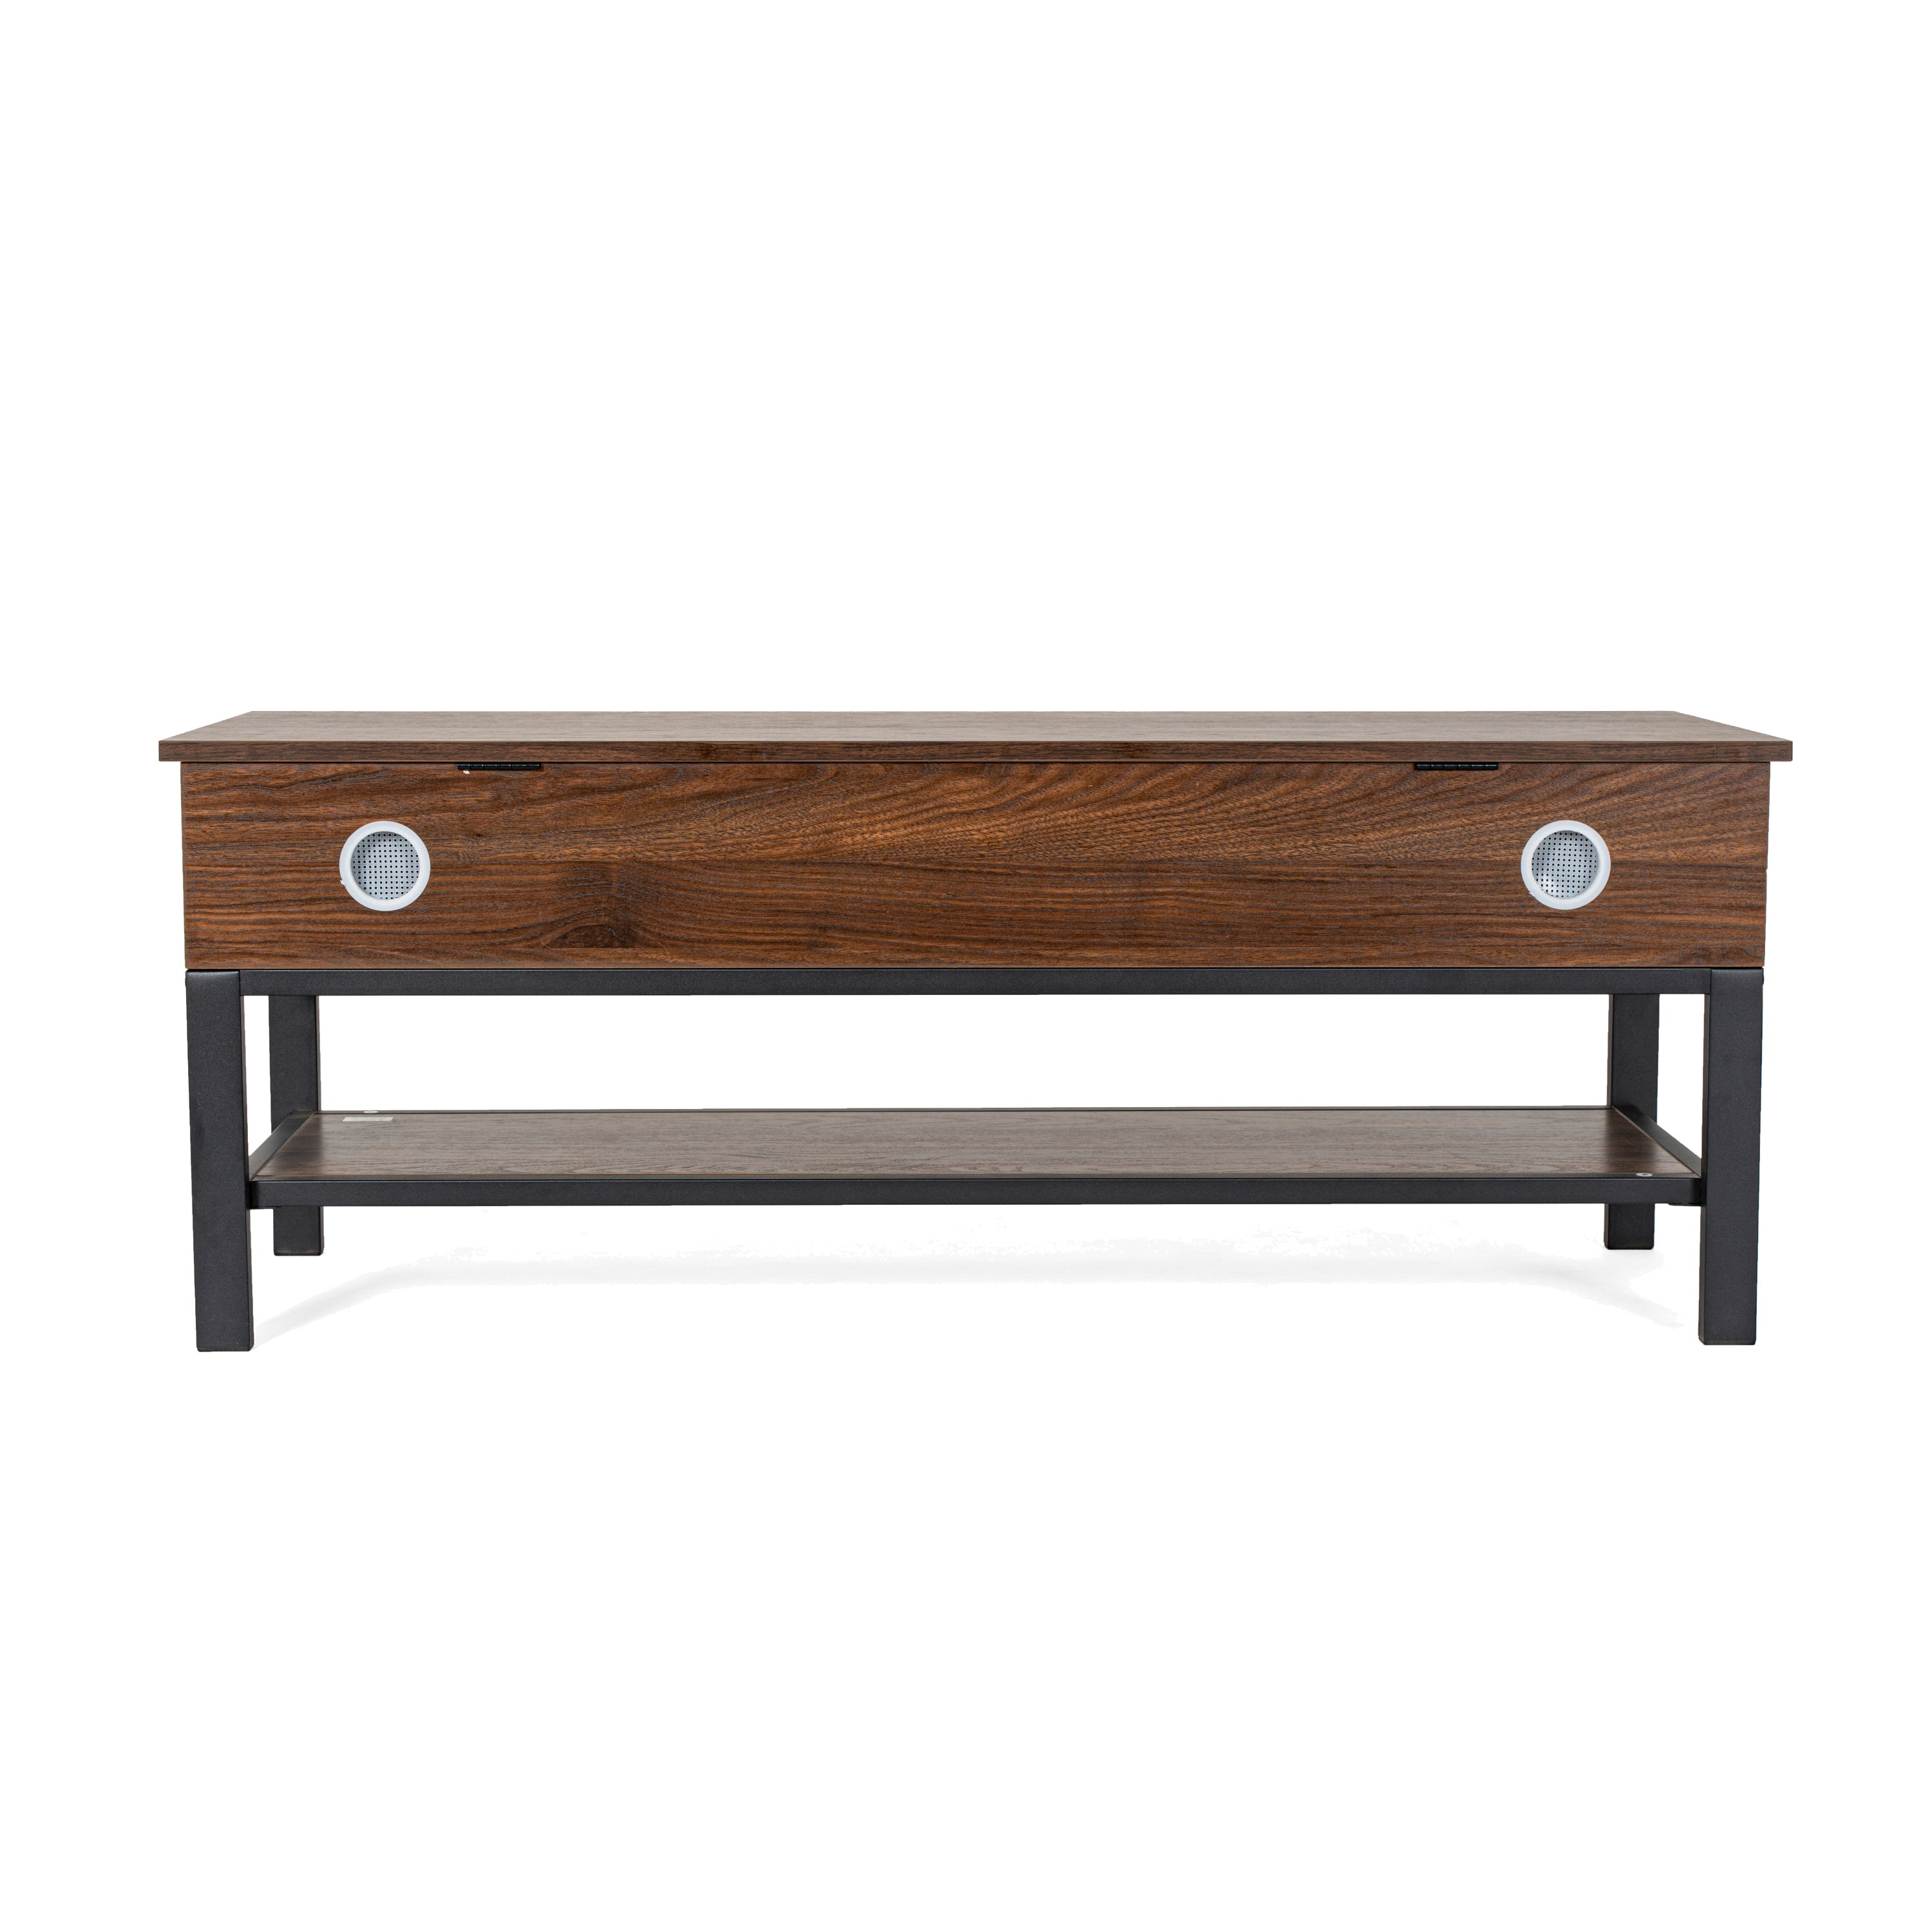 Wyatt Farmhouse Entryway Storage Bench with Lower Shelf Perfect for Entryway, Mudroom, or Bedroom-Entryway Bench-Flash Furniture-Wall2Wall Furnishings